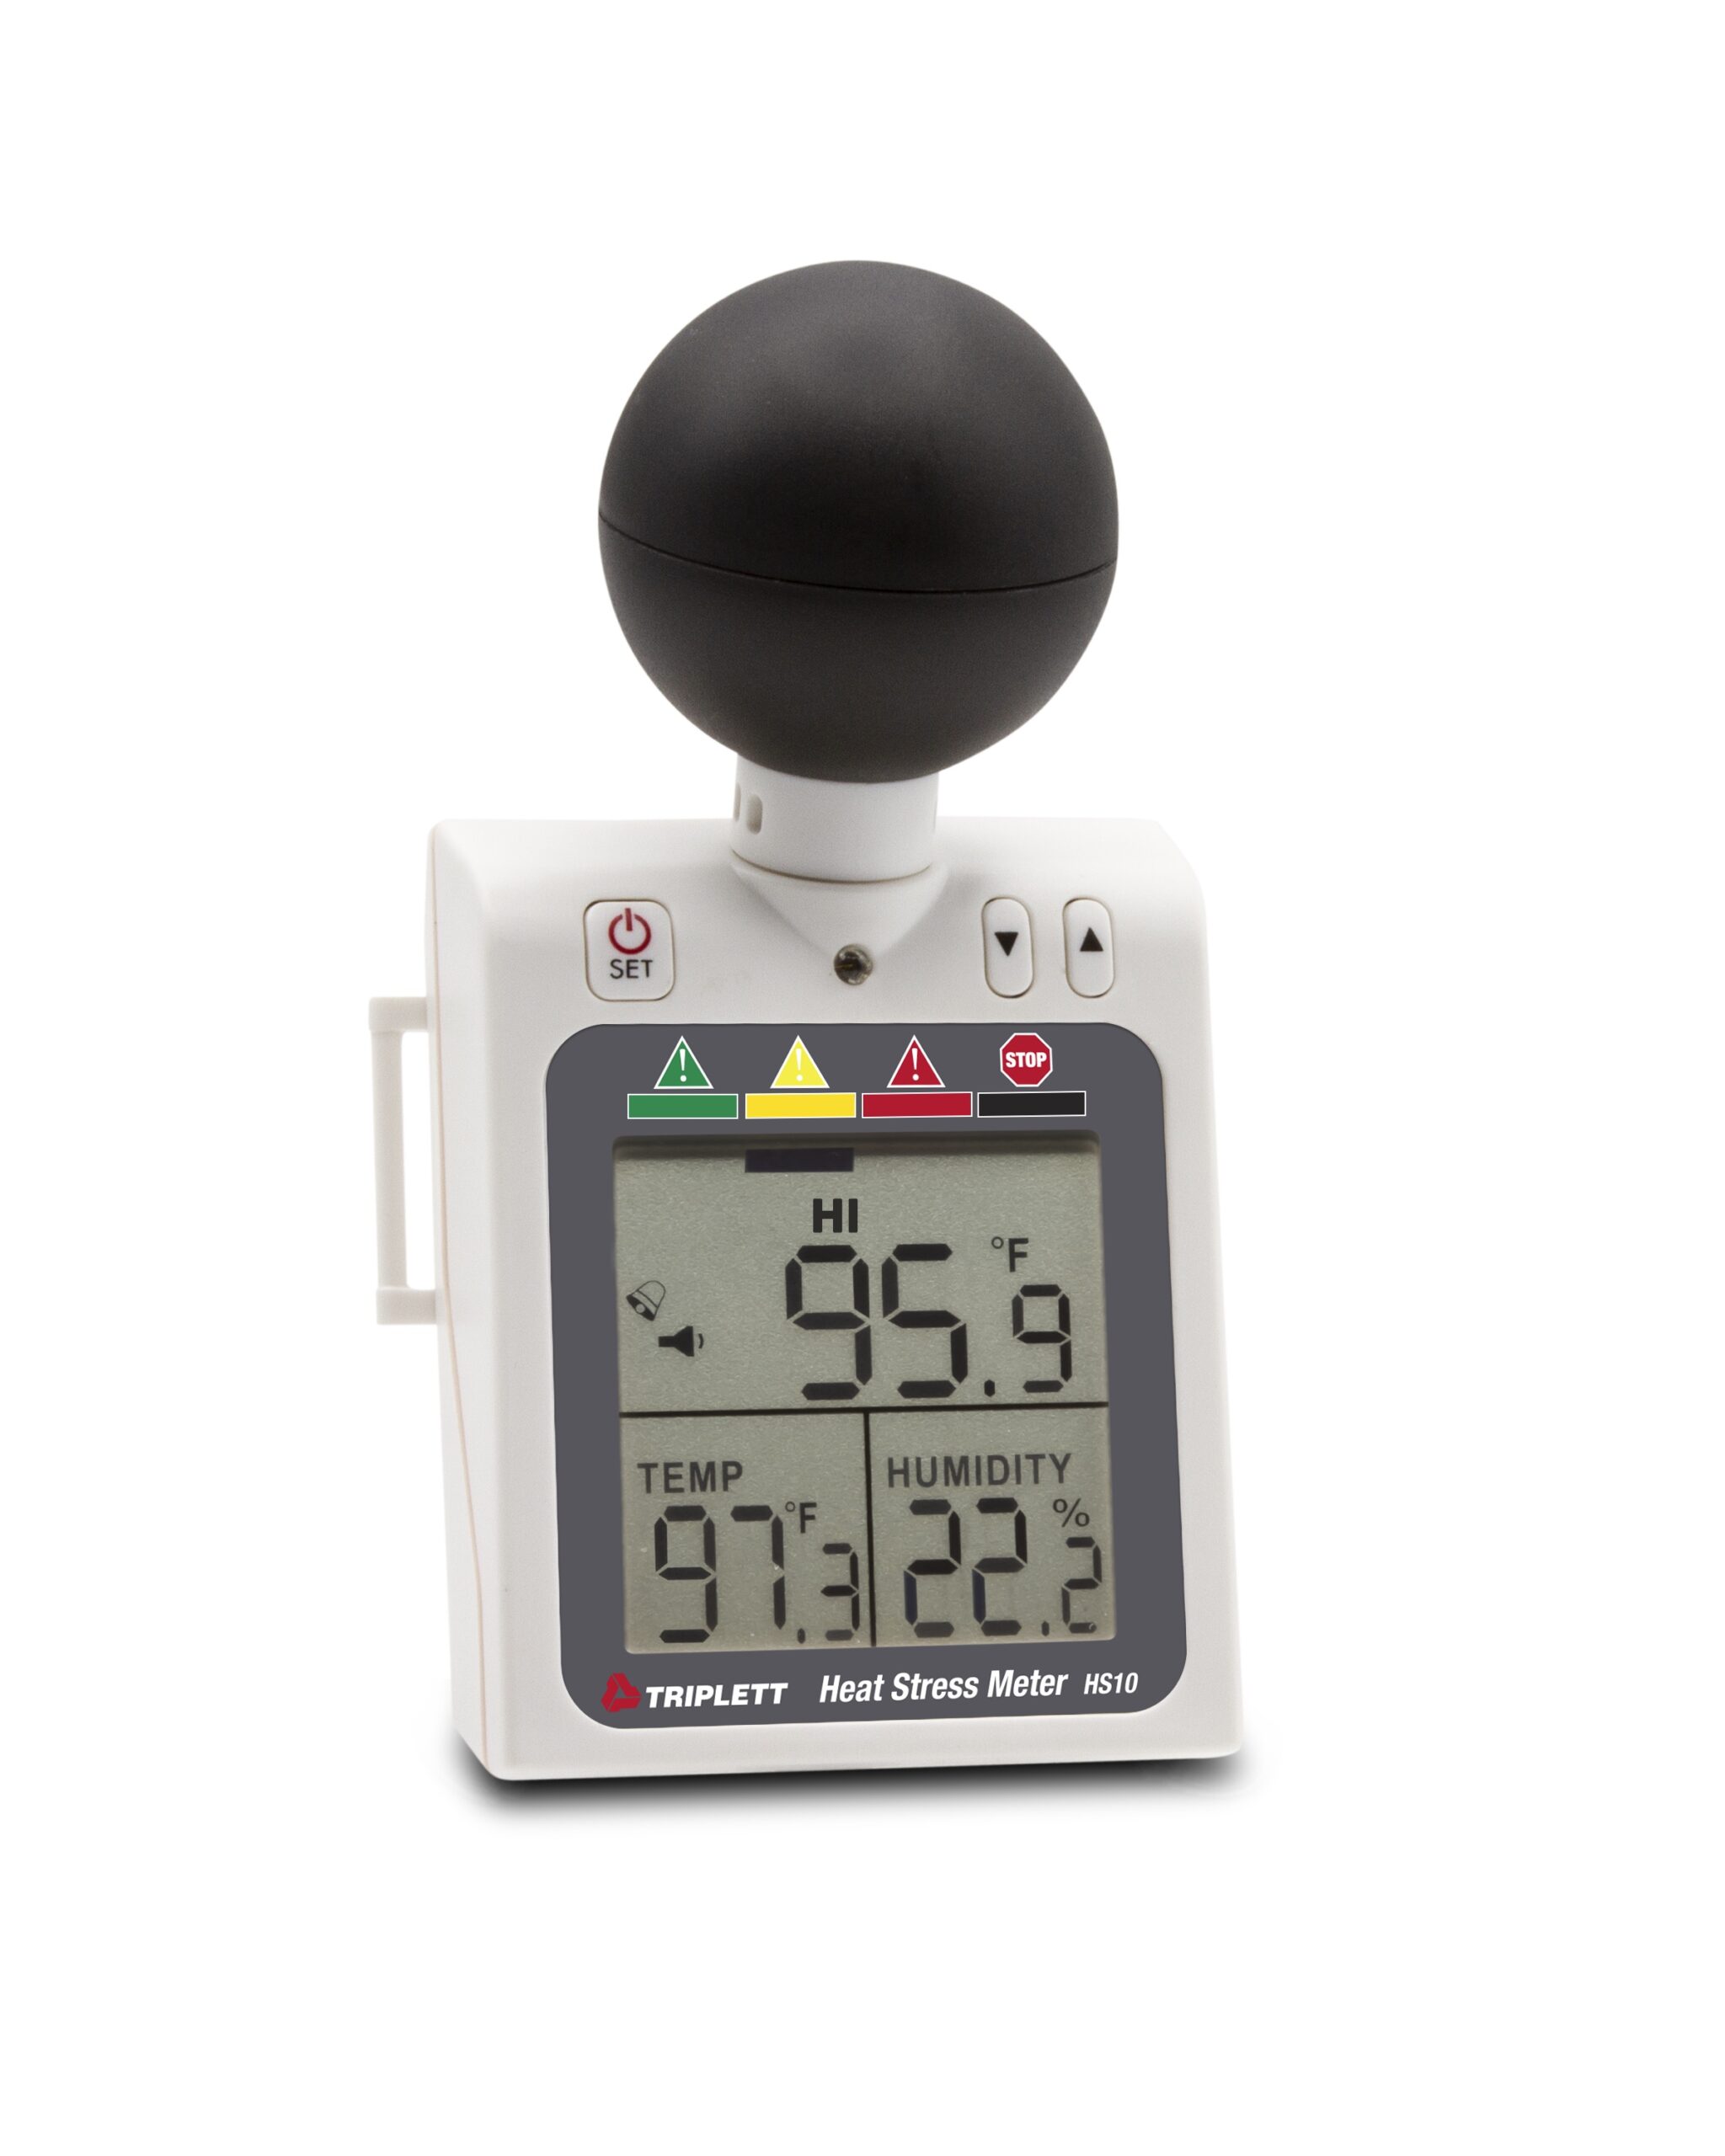 Monitoring indoor/outdoor heat index to help limit the danger of heat-related injury